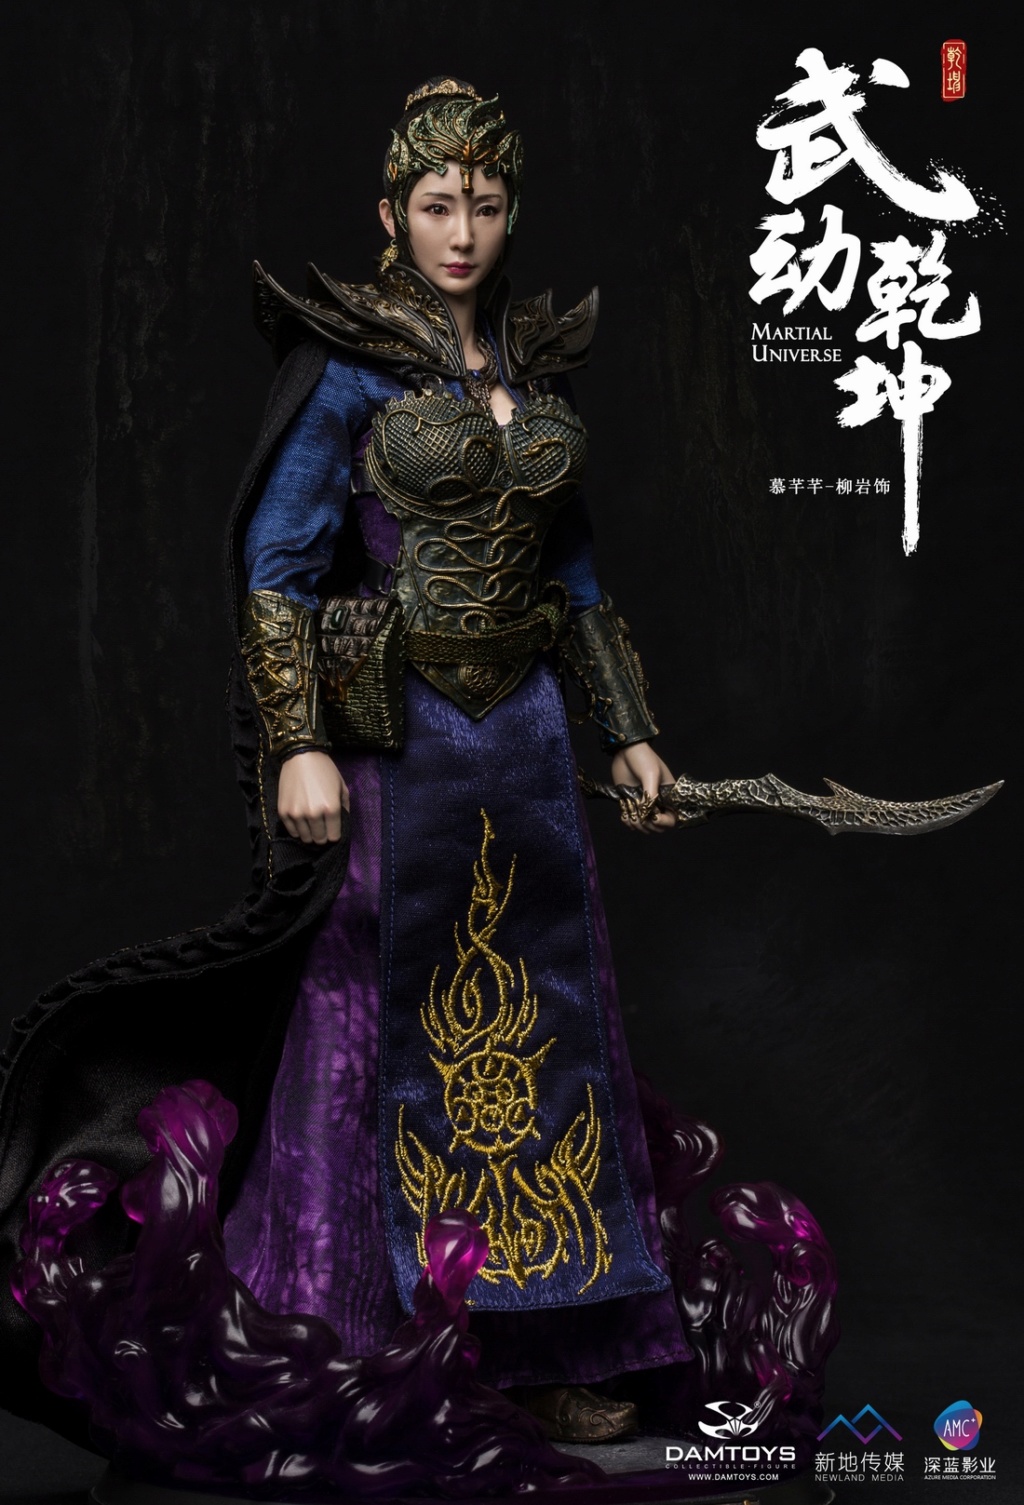 NEW PRODUCT: DAMTOYS: 1/6 "The hero of the martial arts and spirits" - Mu Wei (Liu Yan ornaments) movable doll (DMS017) 09551310